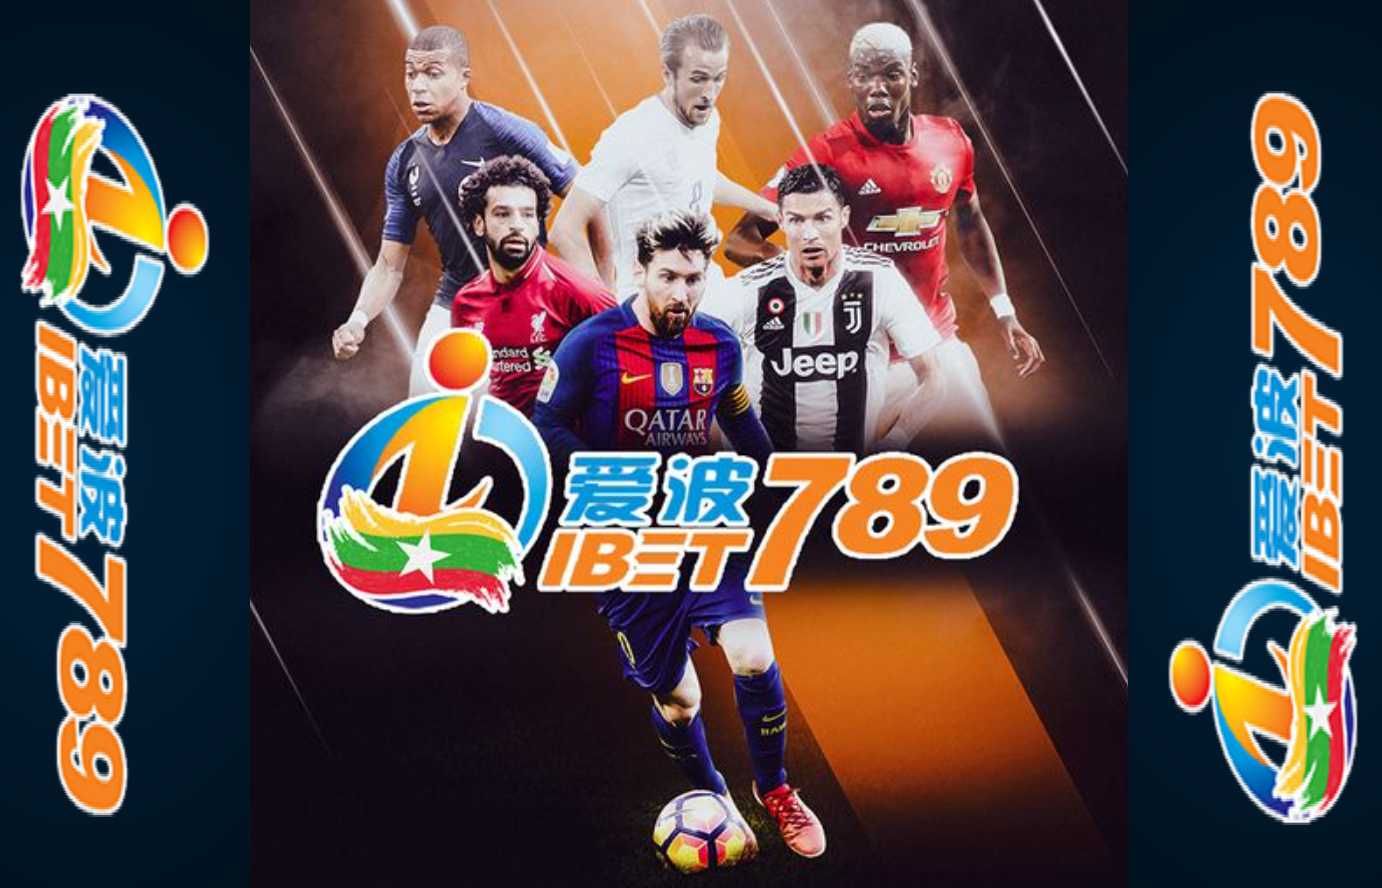 IBet789 android app features